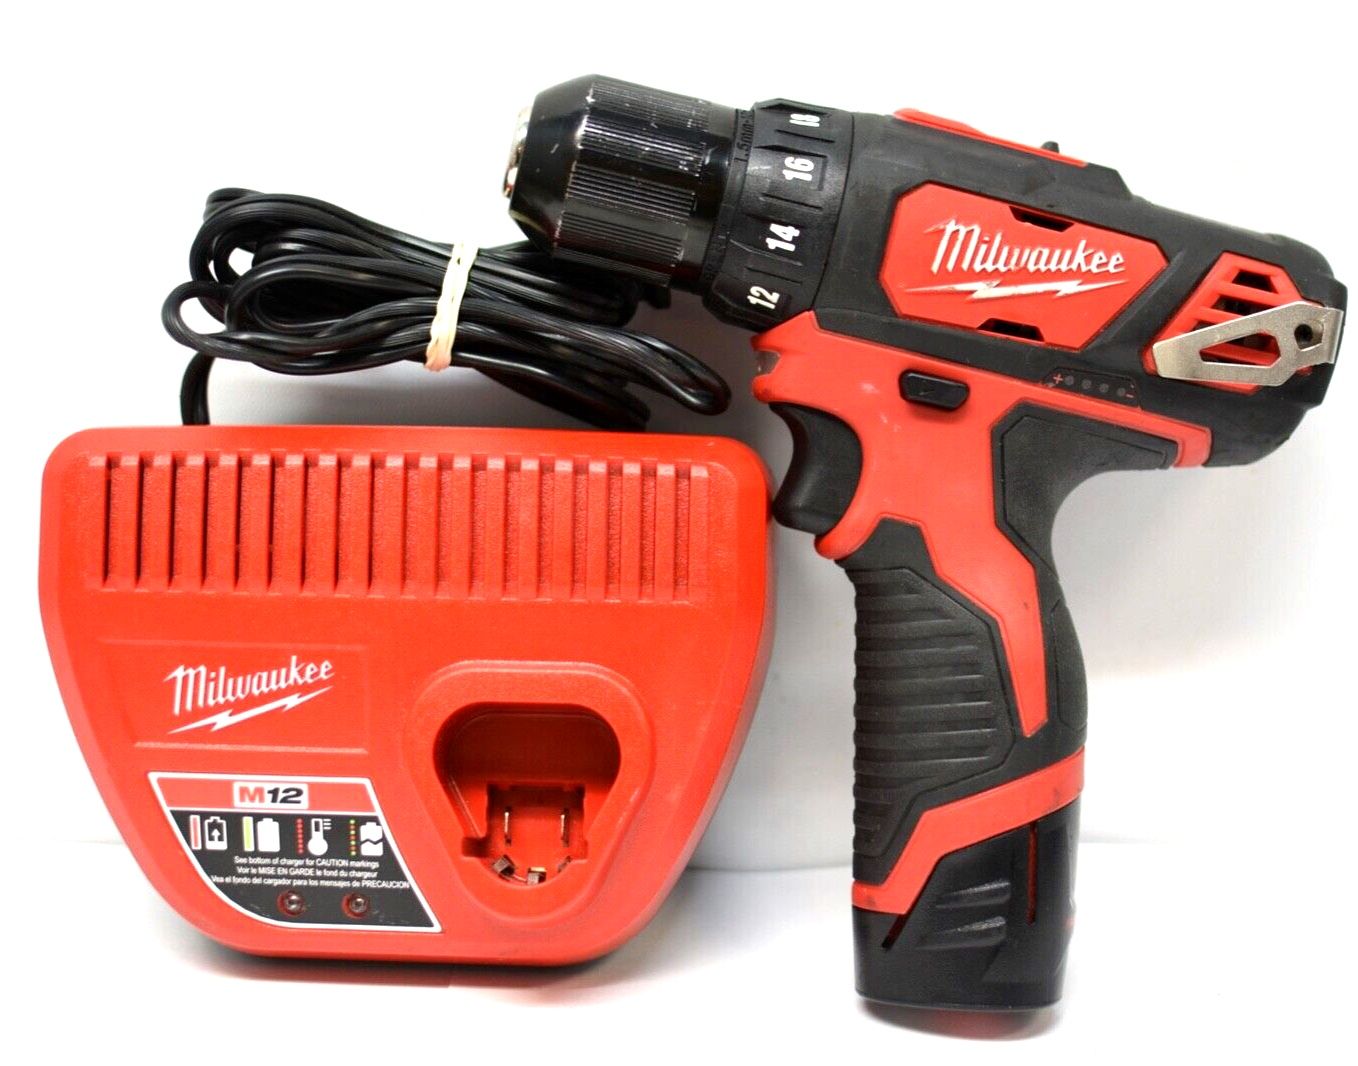 Milwaukee 2407-20 M12 3/8" Drill Driver 1.5Ah Battery & Charger